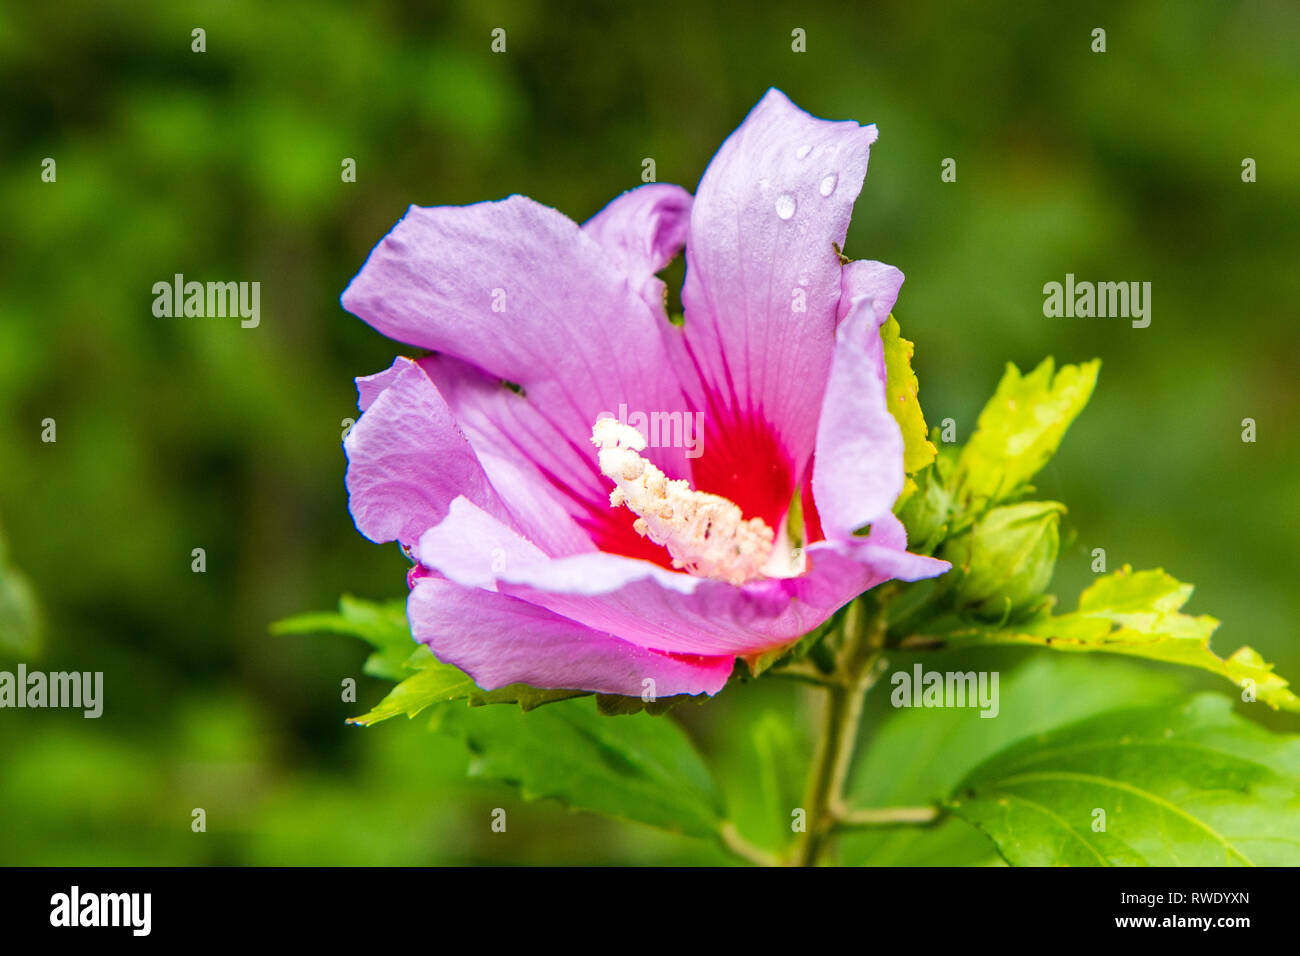 A beautiful pink Rose-mallow in bloom with droplets of water on a leafy stem in front of green foliage. Stock Photo